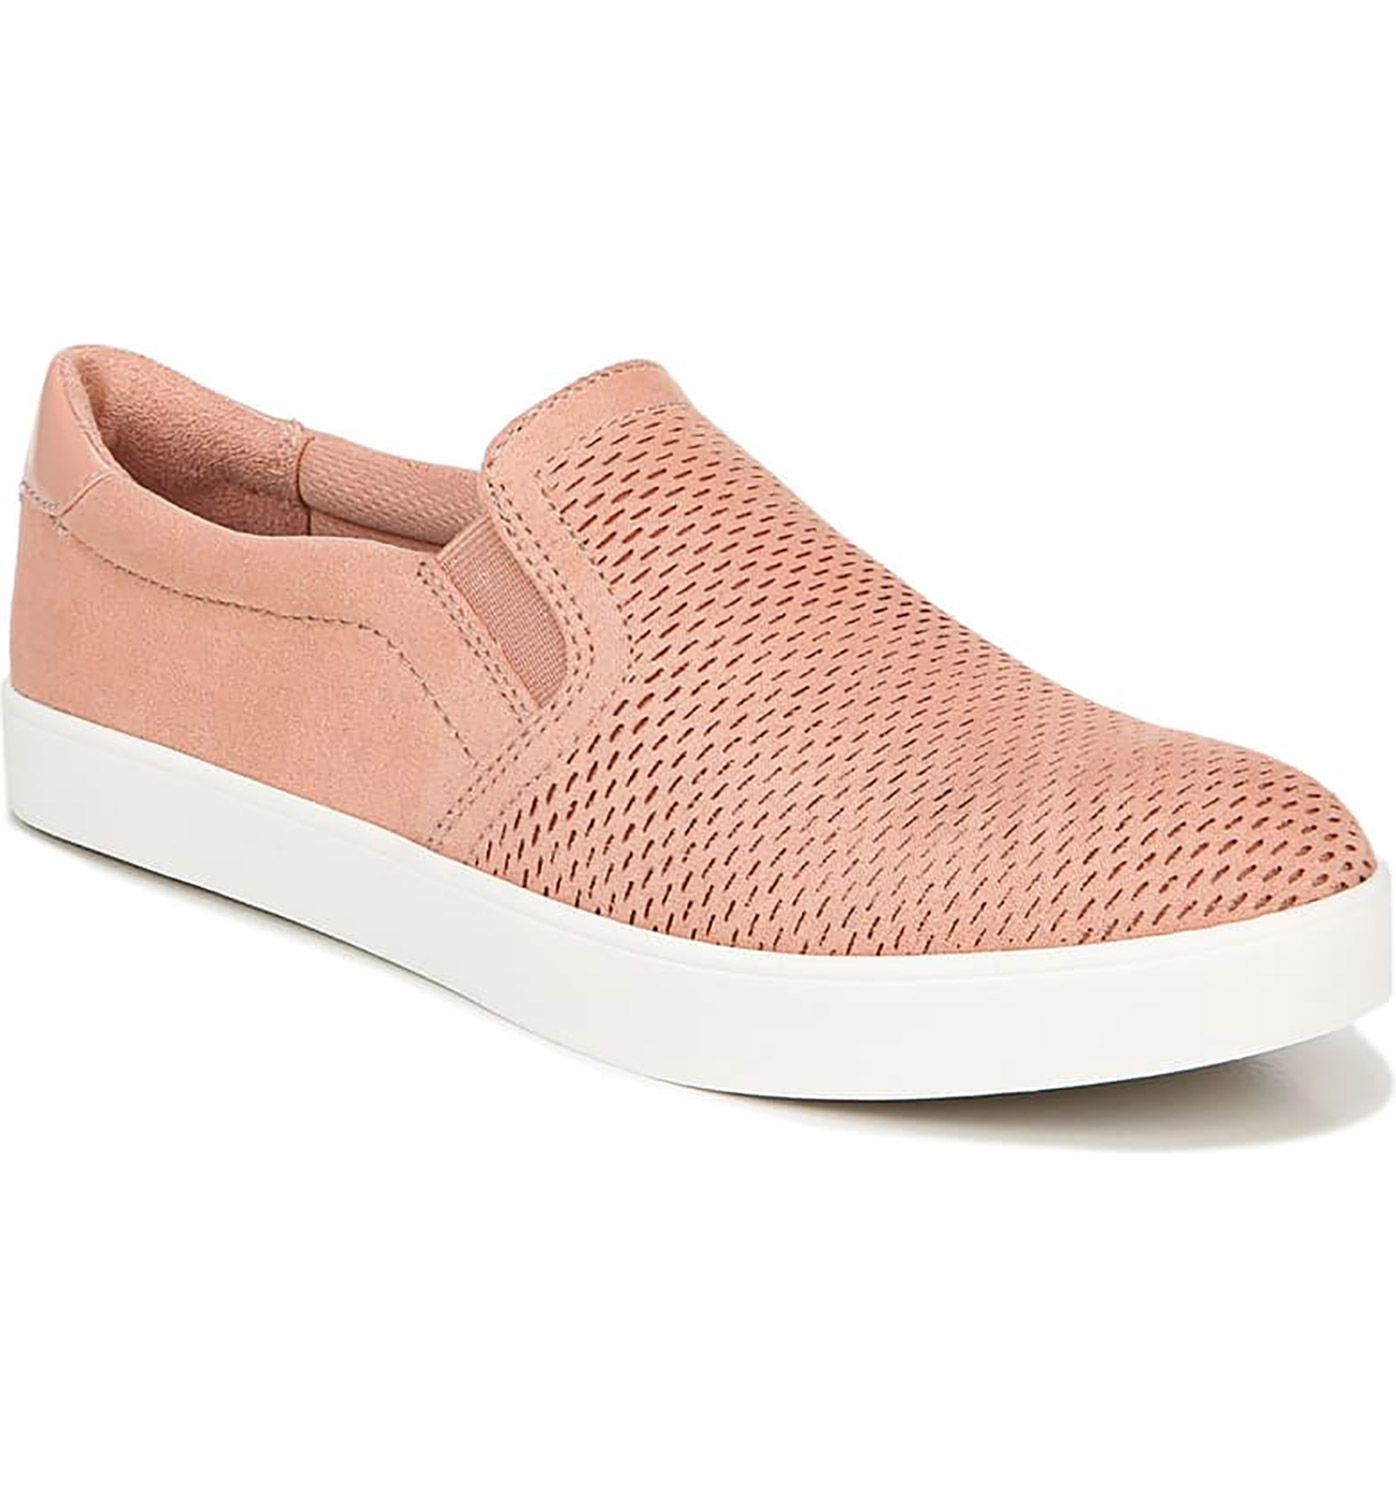 Dr. Scholl&rsquo;s Madison Slip-On Sneaker